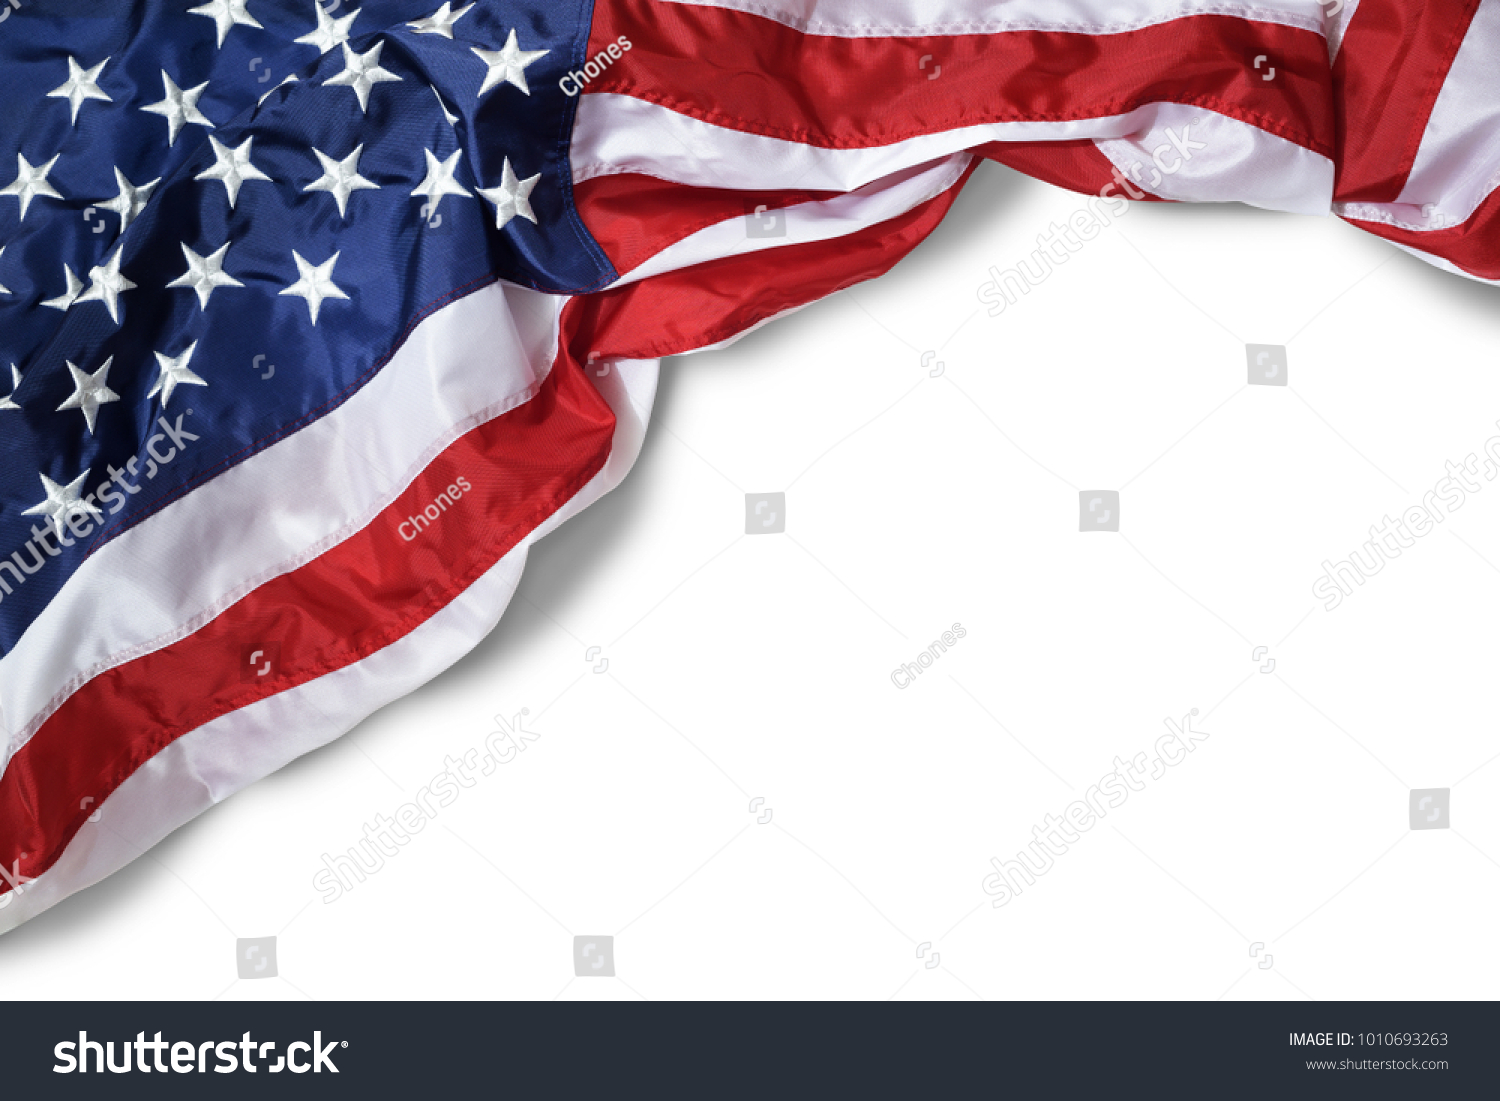 Closeup ruffled American flag isolated on white background #1010693263